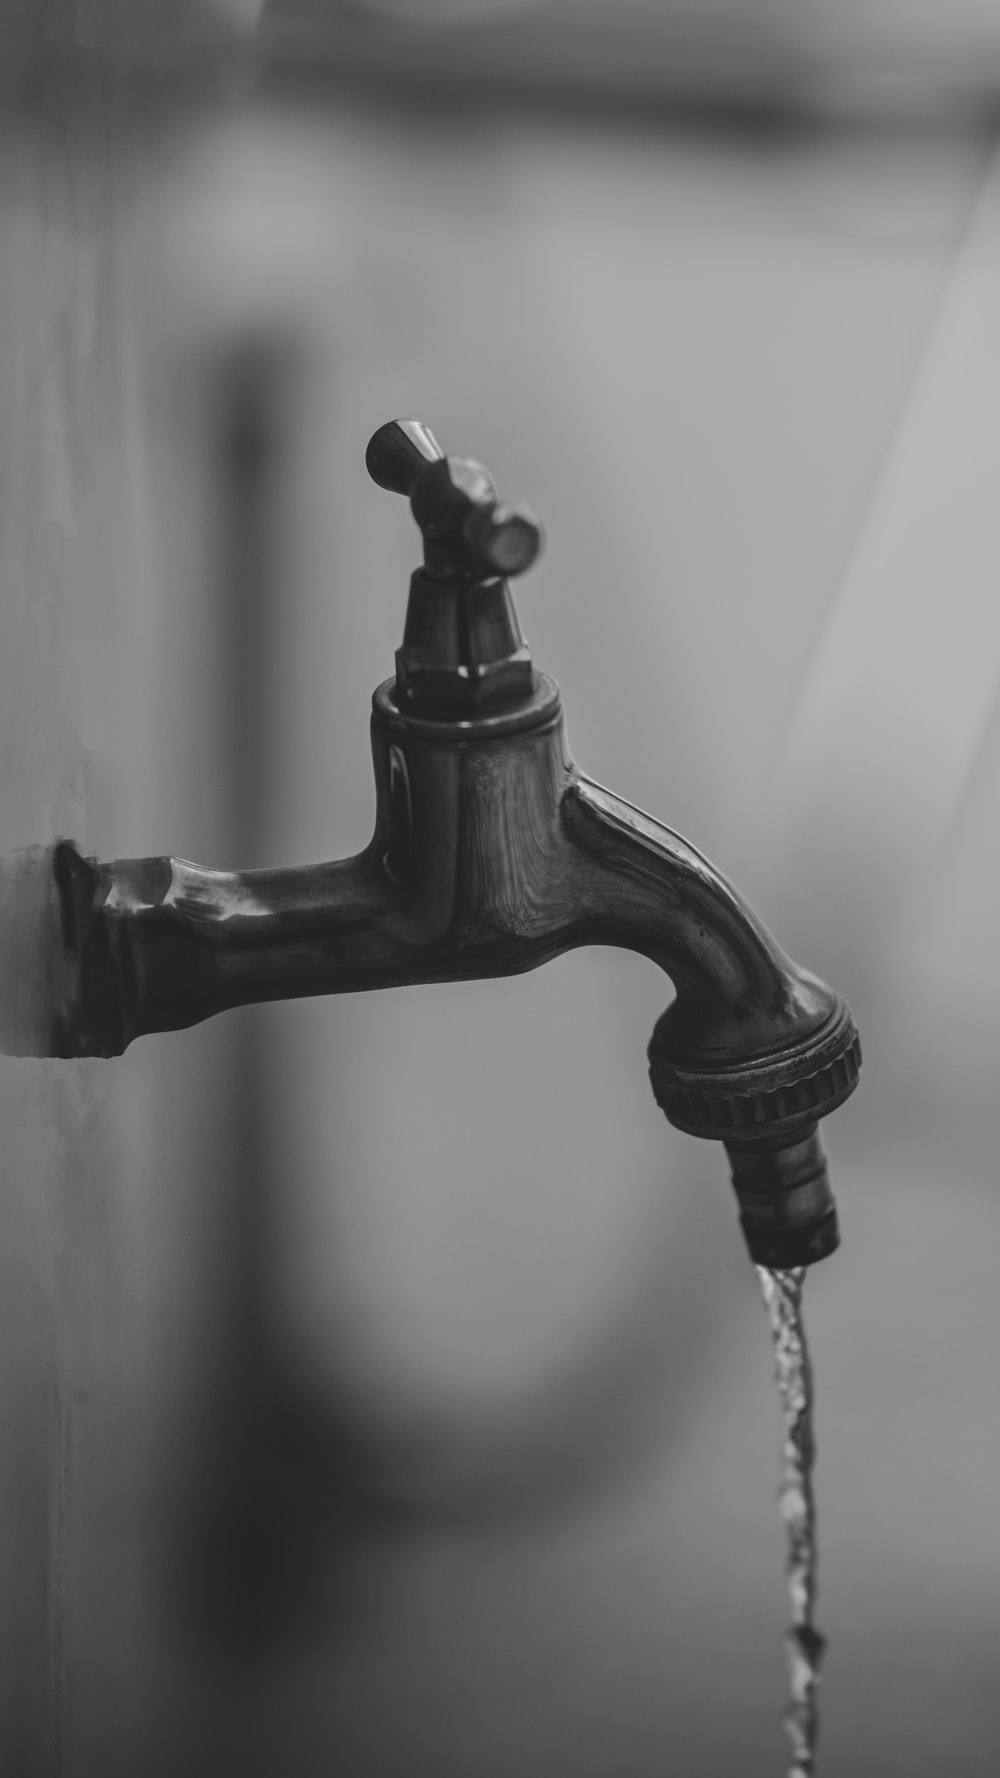 Faucet Picture. Download Free Image